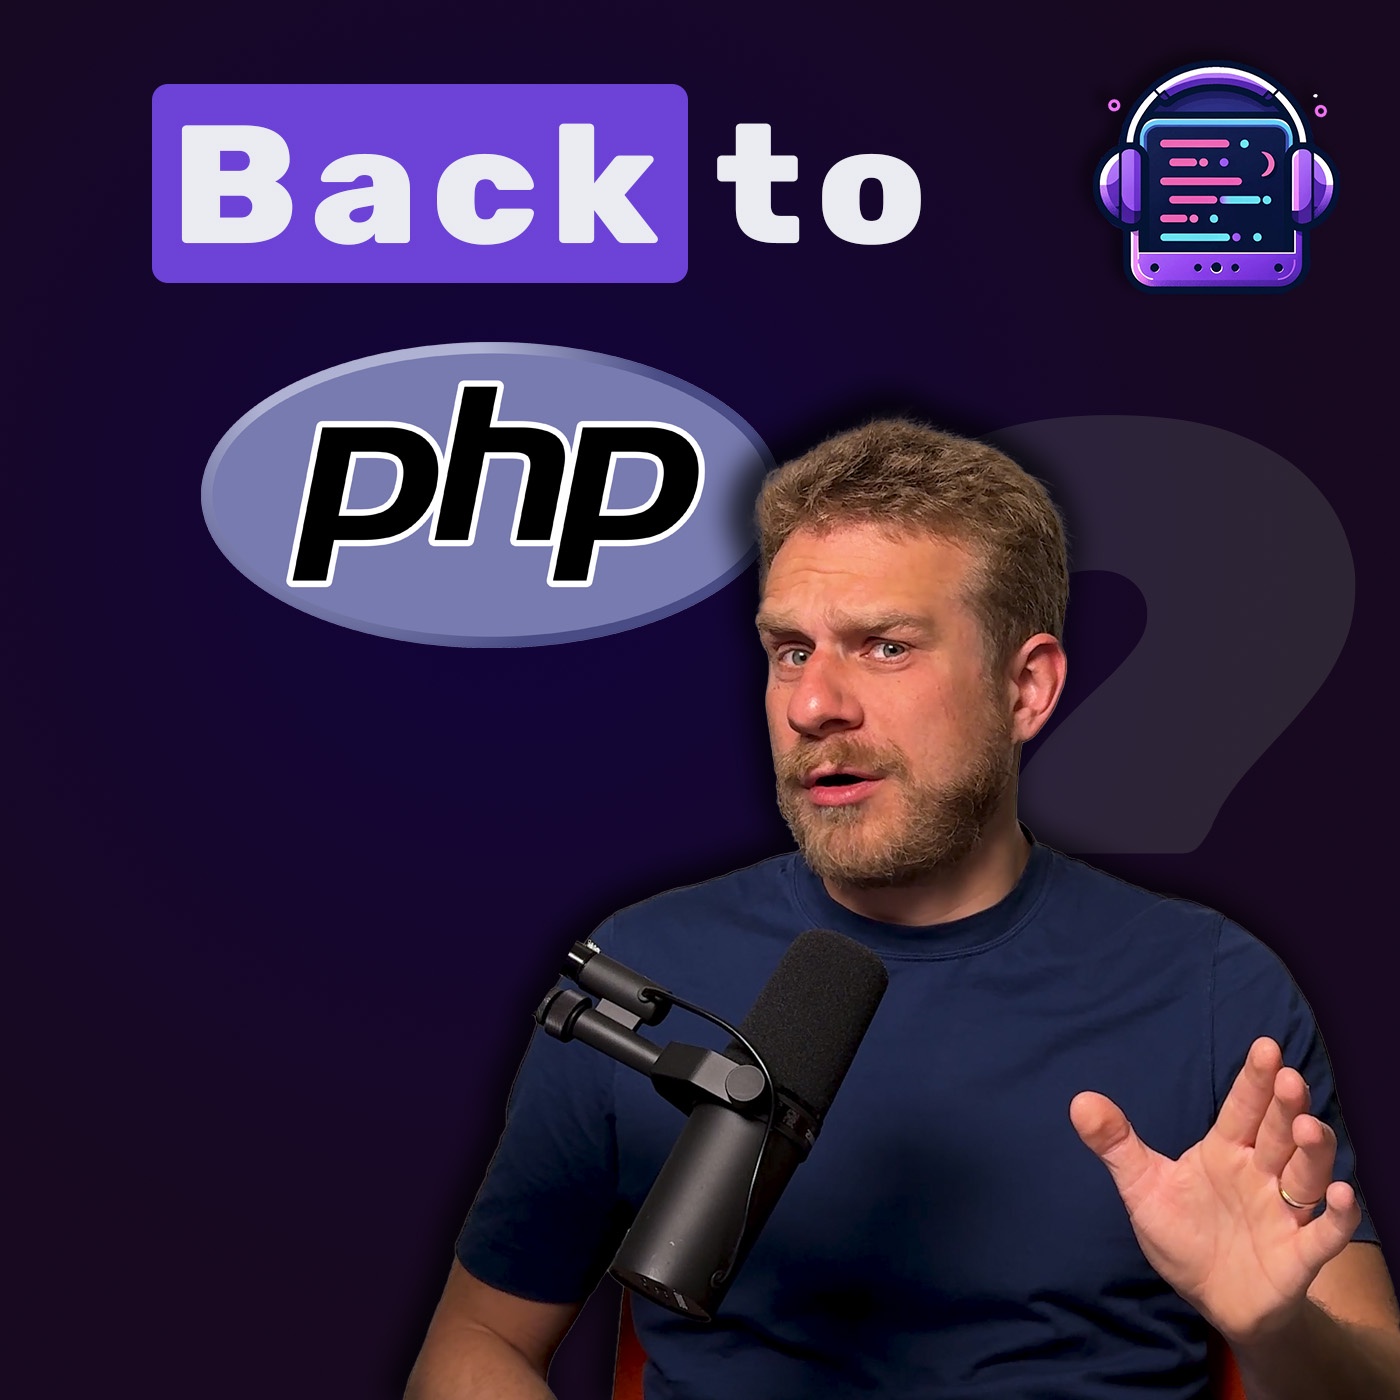 Are we going back to PHP with fullstack JavaScript?